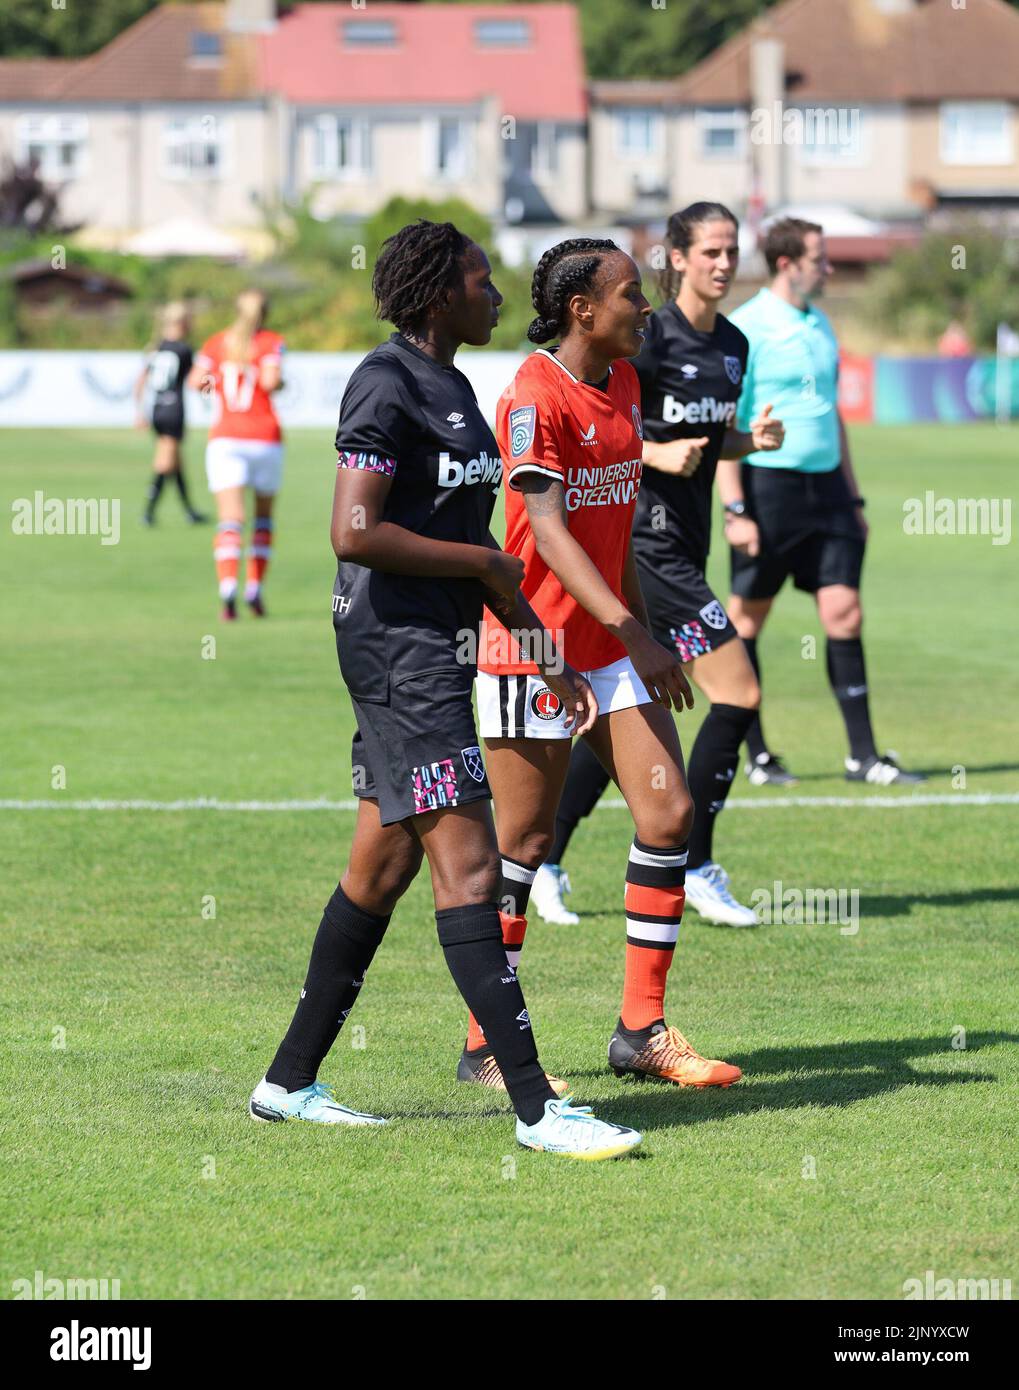 Catford, UK. 14th Aug, 2022. The Oakwood Stadium, Catford, 14 aug 2022 Hawa Cissoko (WHU) during a friendly game in August 2022 (Bettina Weissensteiner/SPP) Credit: SPP Sport Press Photo. /Alamy Live News Stock Photo